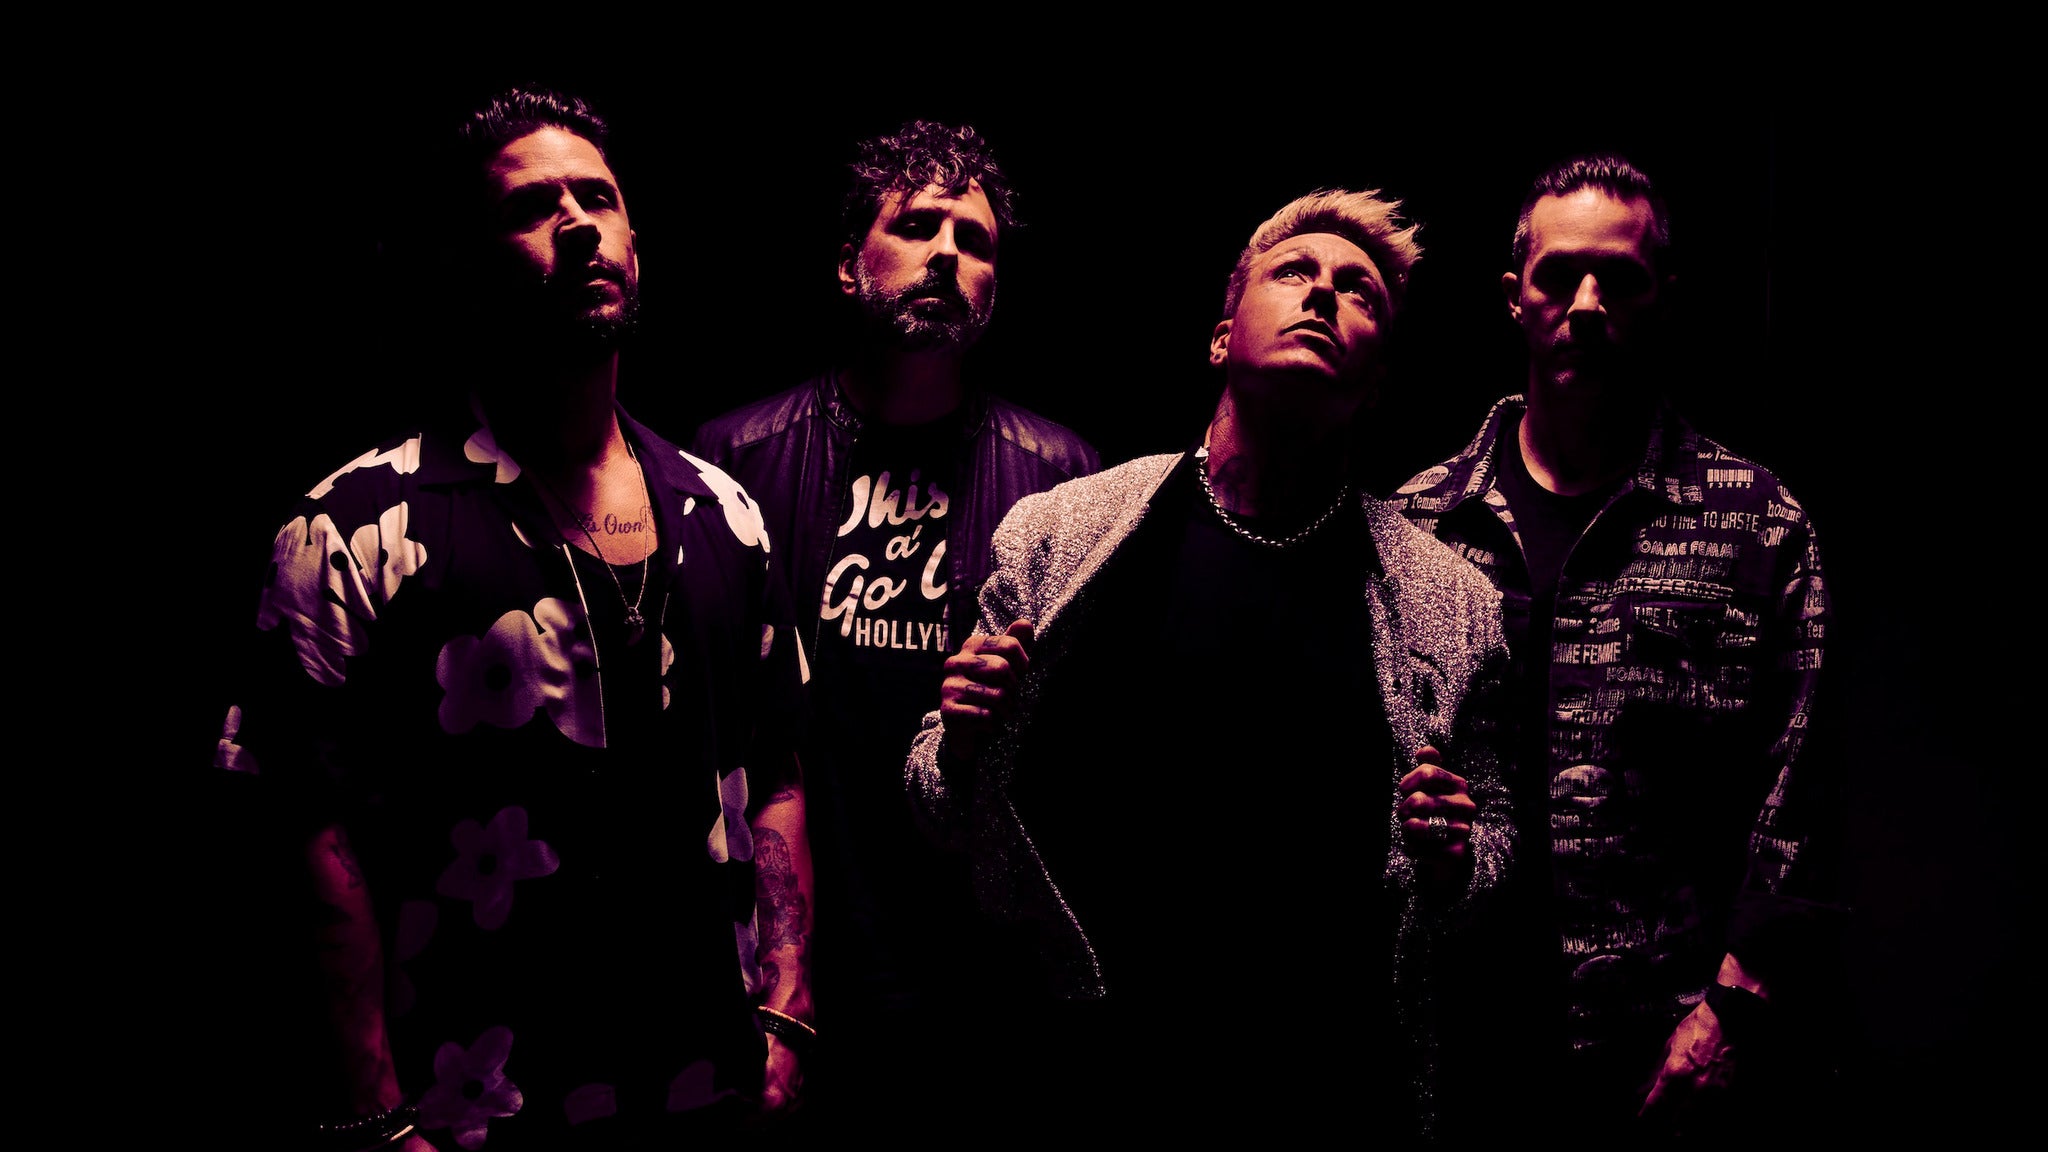 Papa Roach "Kill The Noise" Tour With Hollywood Undead and Bad Wolves